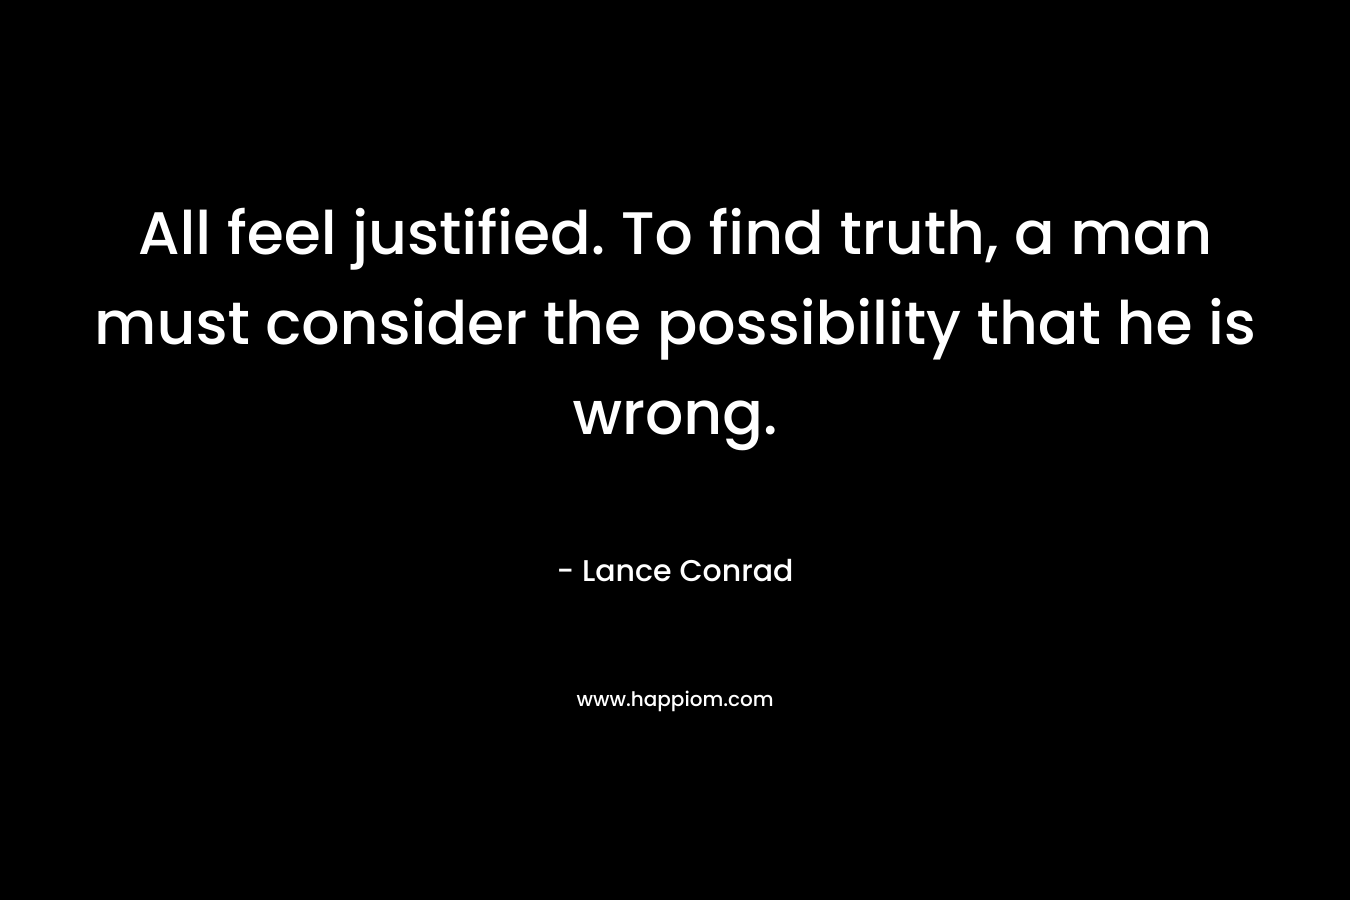 All feel justified. To find truth, a man must consider the possibility that he is wrong. – Lance Conrad